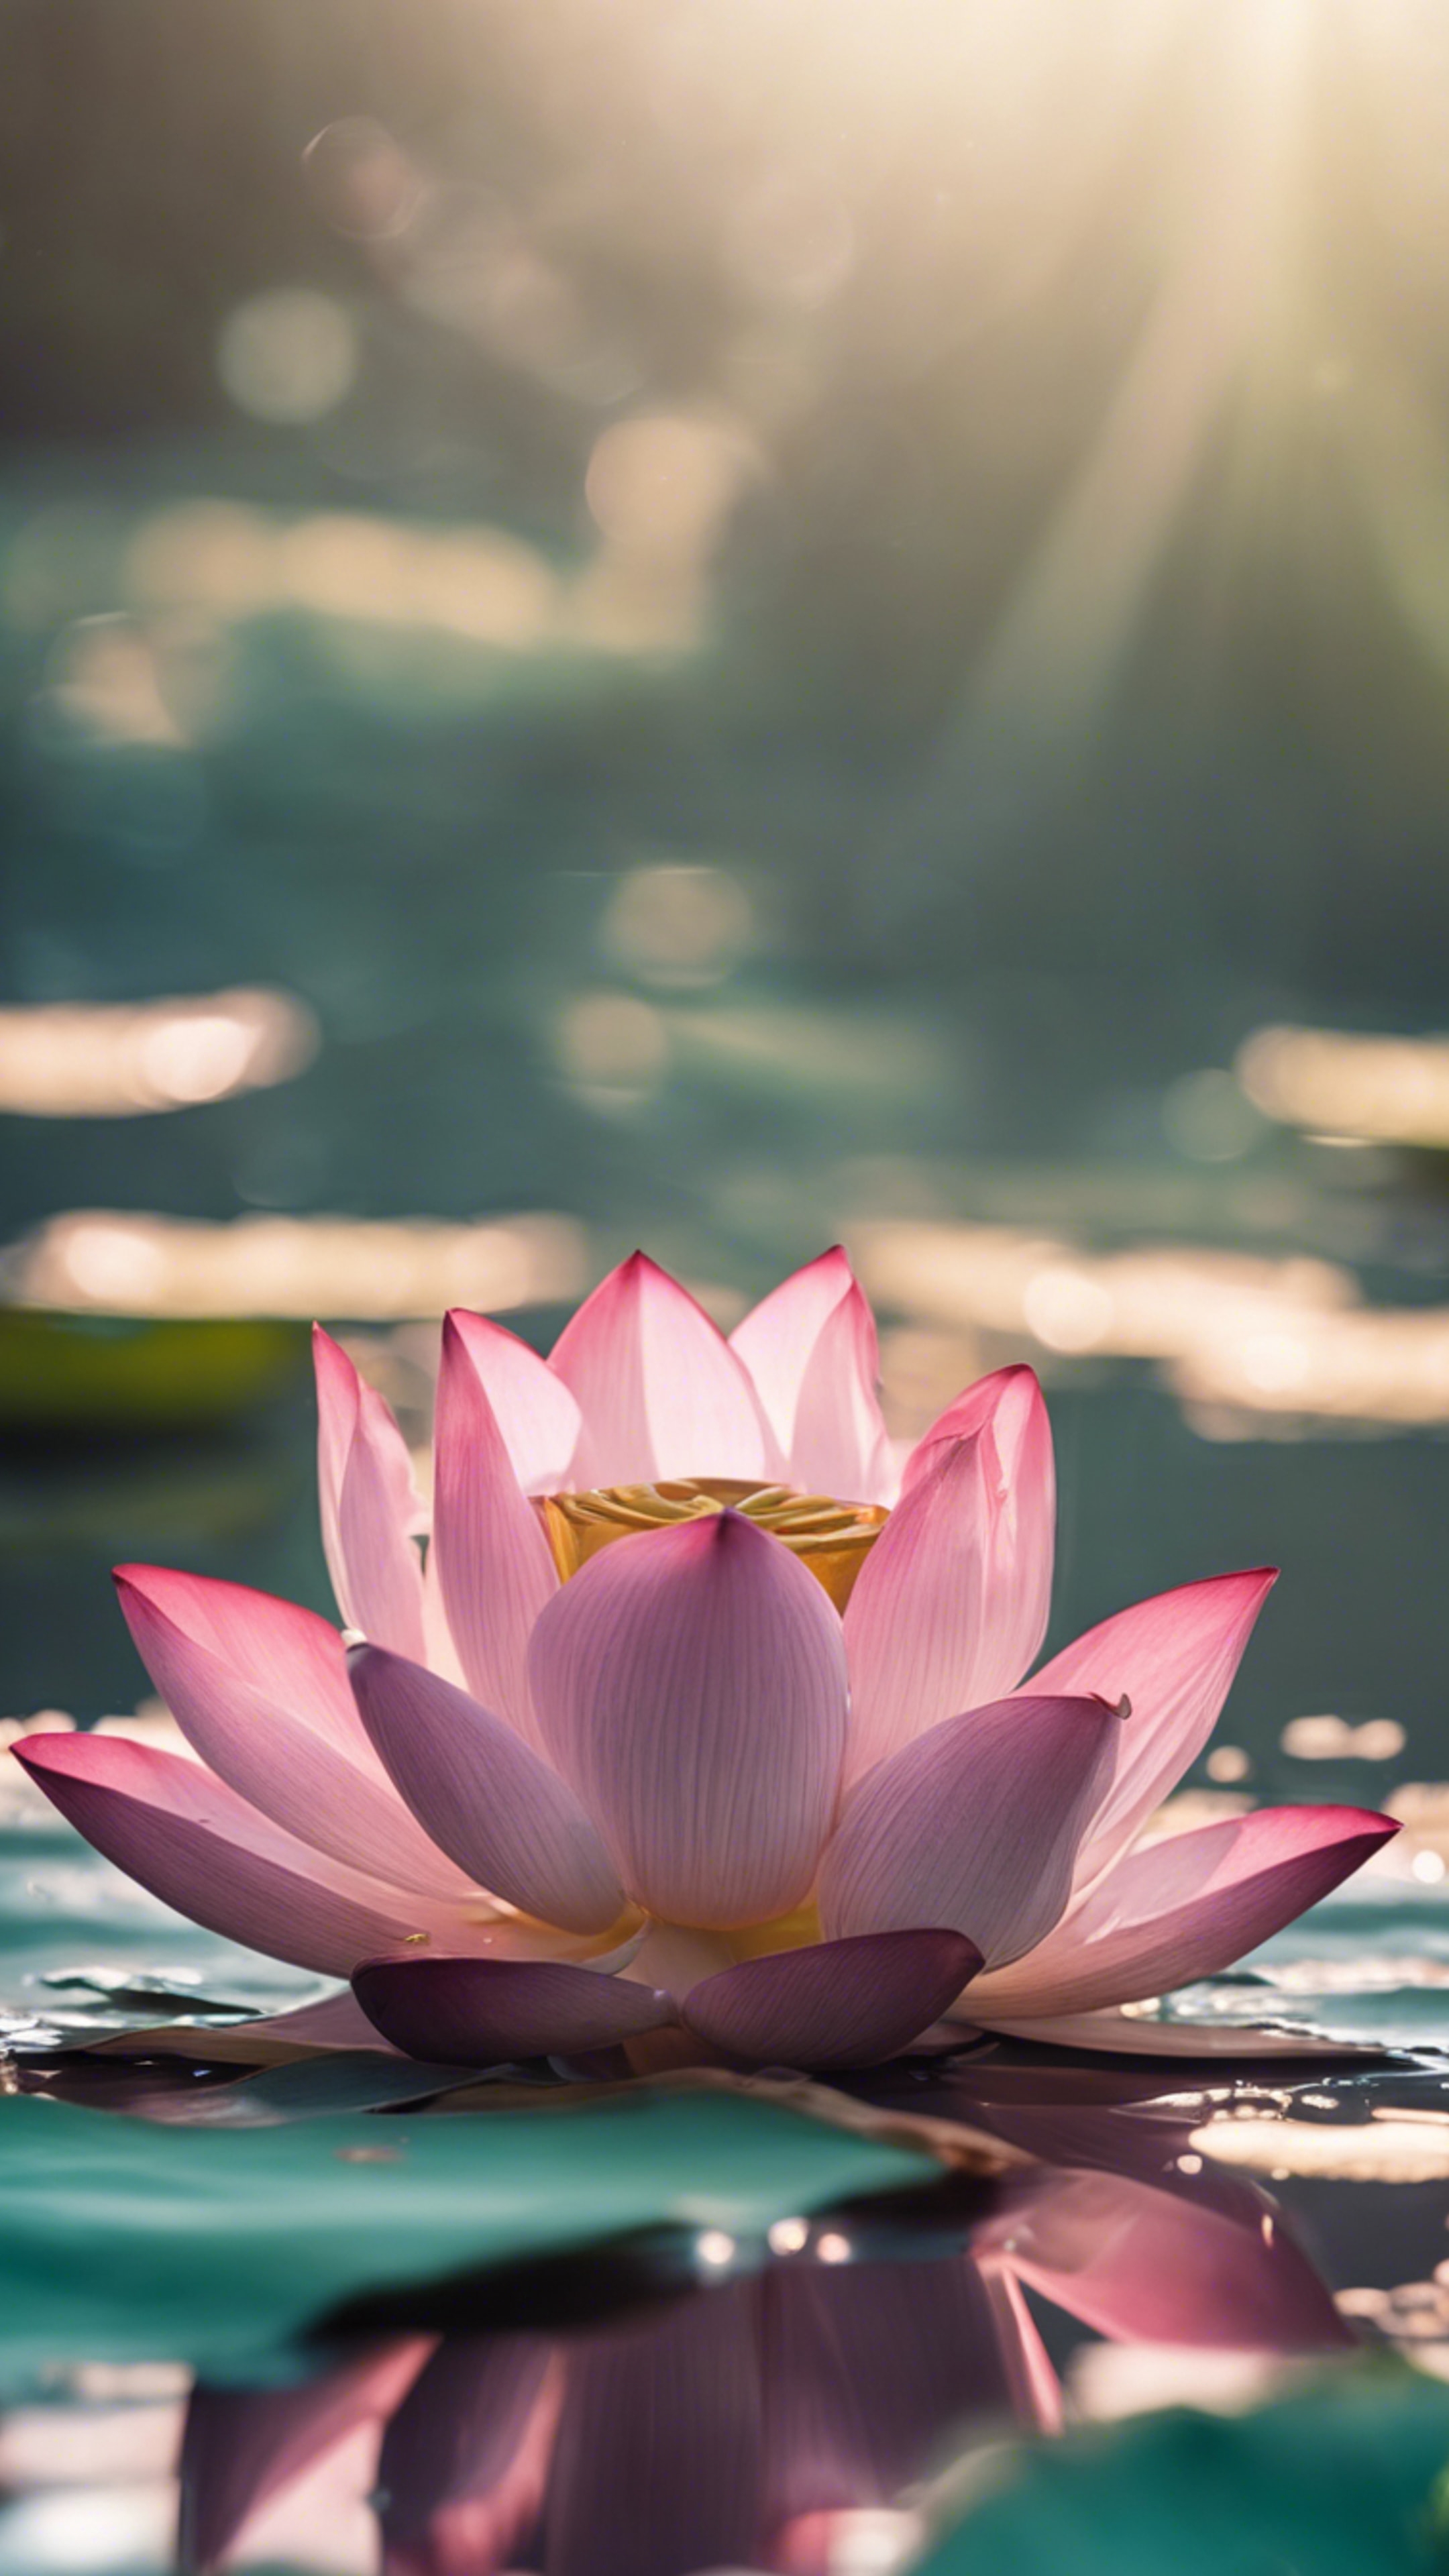 A close-up image of a single blooming lotus on a clear pond. Hintergrund[056d411e4bd14d9f8d69]